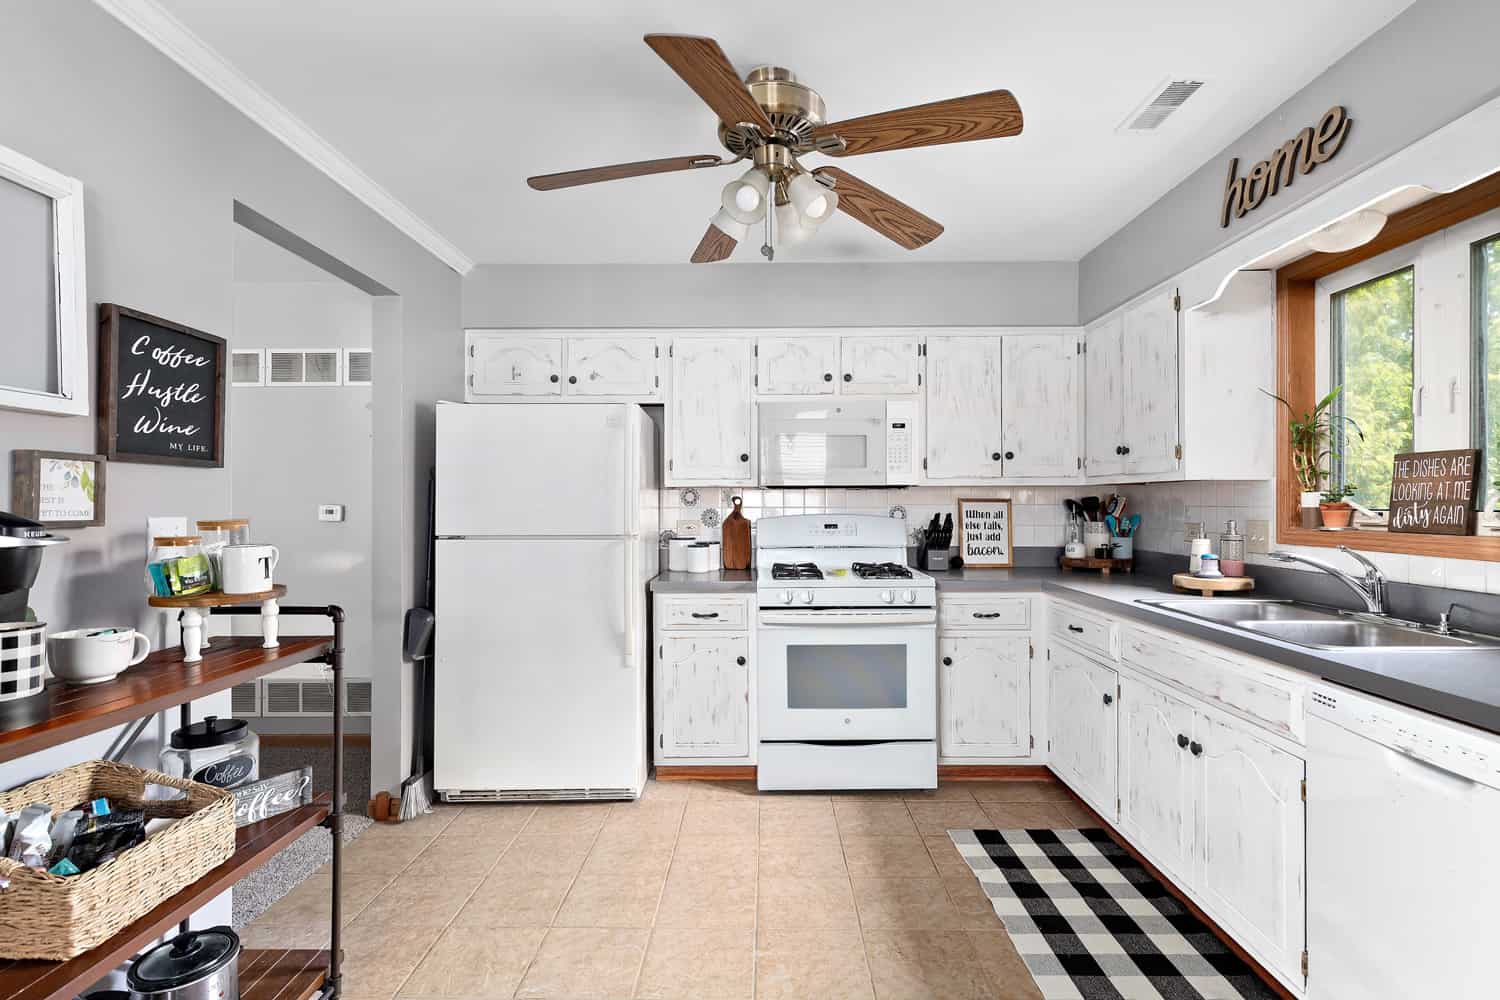 A renovated farmhouse kitchen with white cabinets, white appliances, tile flooring, and decorations throughout.